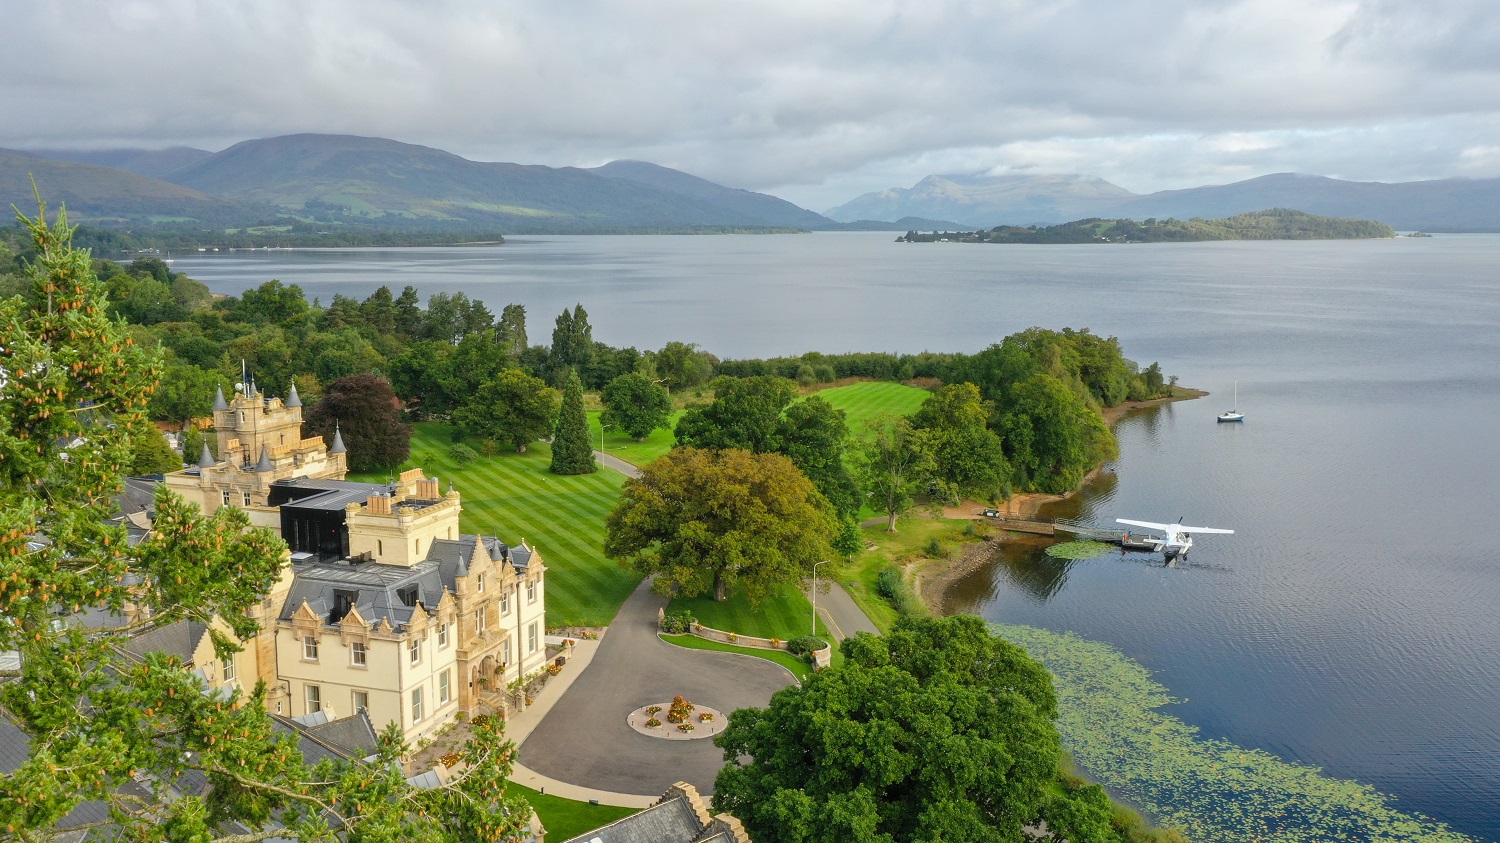 Aerial View of Cameron House. In the background Loch Lomond can be seen